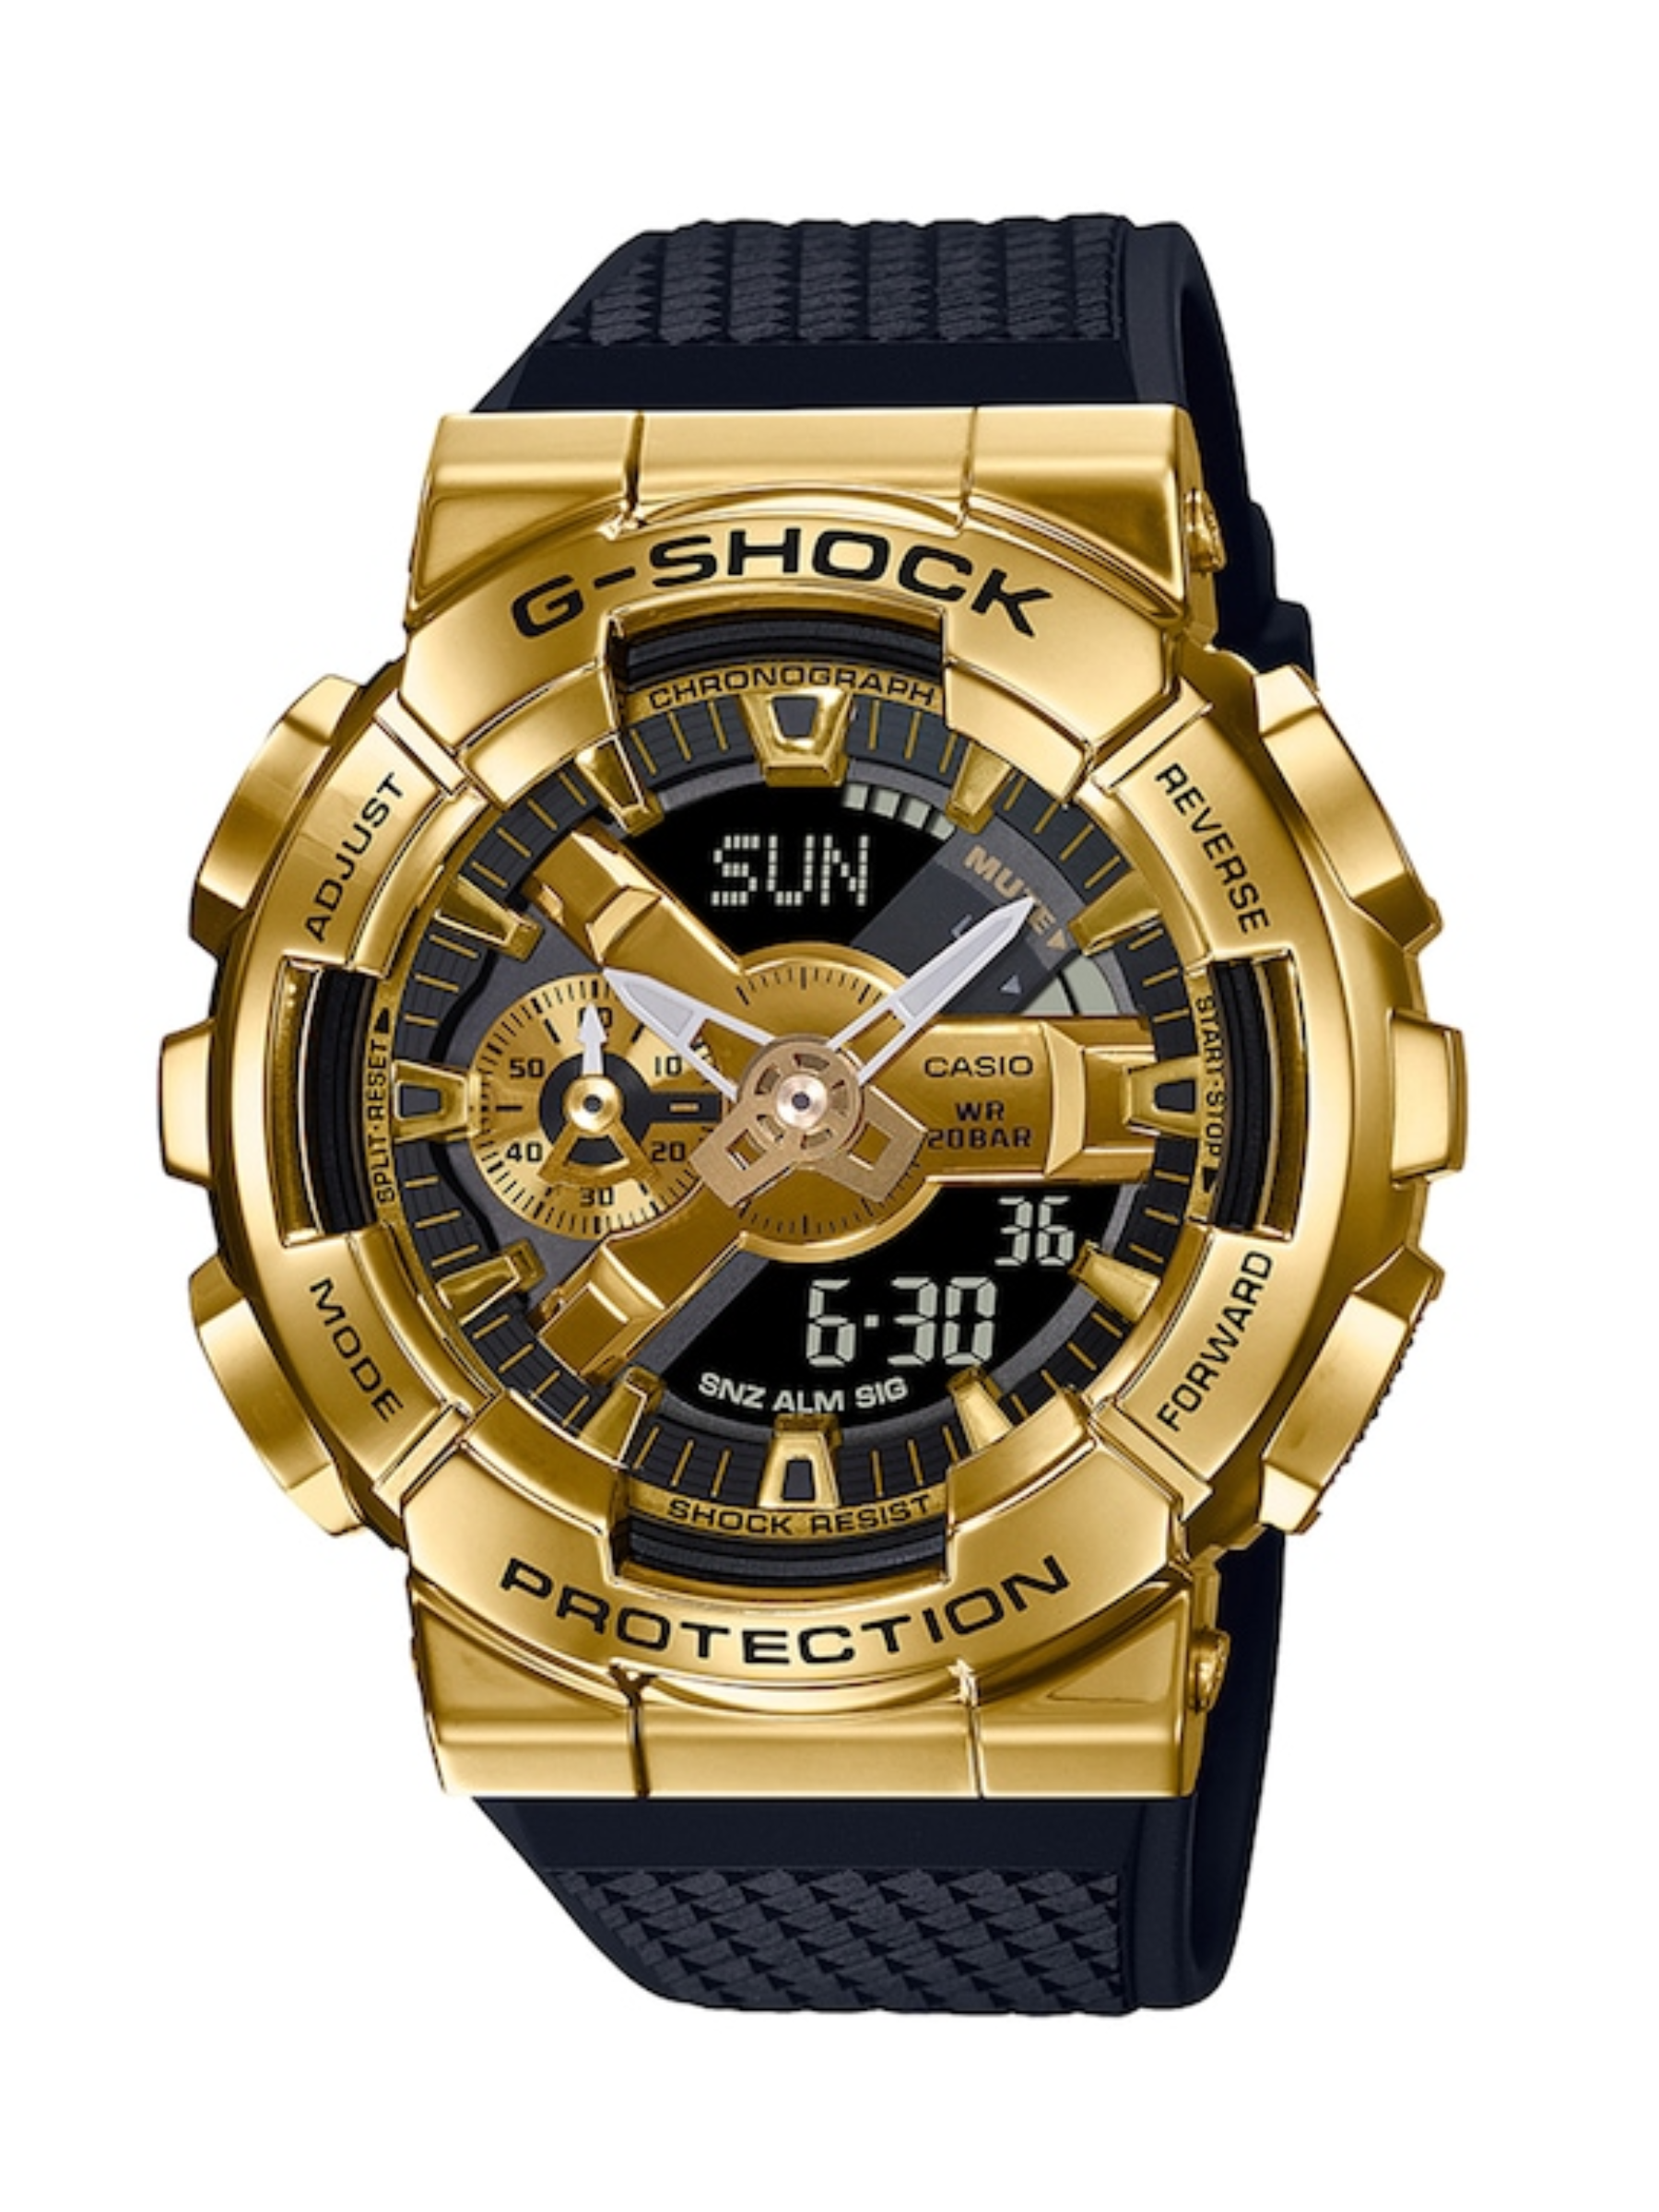 G-Shocks’s GM-110 Series is sporty enough to get knocked around during workouts or games, but features a gold-toned face that gives it a grown-up touch when sweats aren’t in the dress code. $230, Nordstrom. <a href="https://www.nordstrom.com/s/g-shock-gm-110-series-analog-digital-watch-49mm/7187381?">Get it now!</a><p>Sign up for today’s biggest stories, from pop culture to politics.</p><a href="https://www.glamour.com/newsletter/news?sourceCode=msnsend">Sign Up</a>